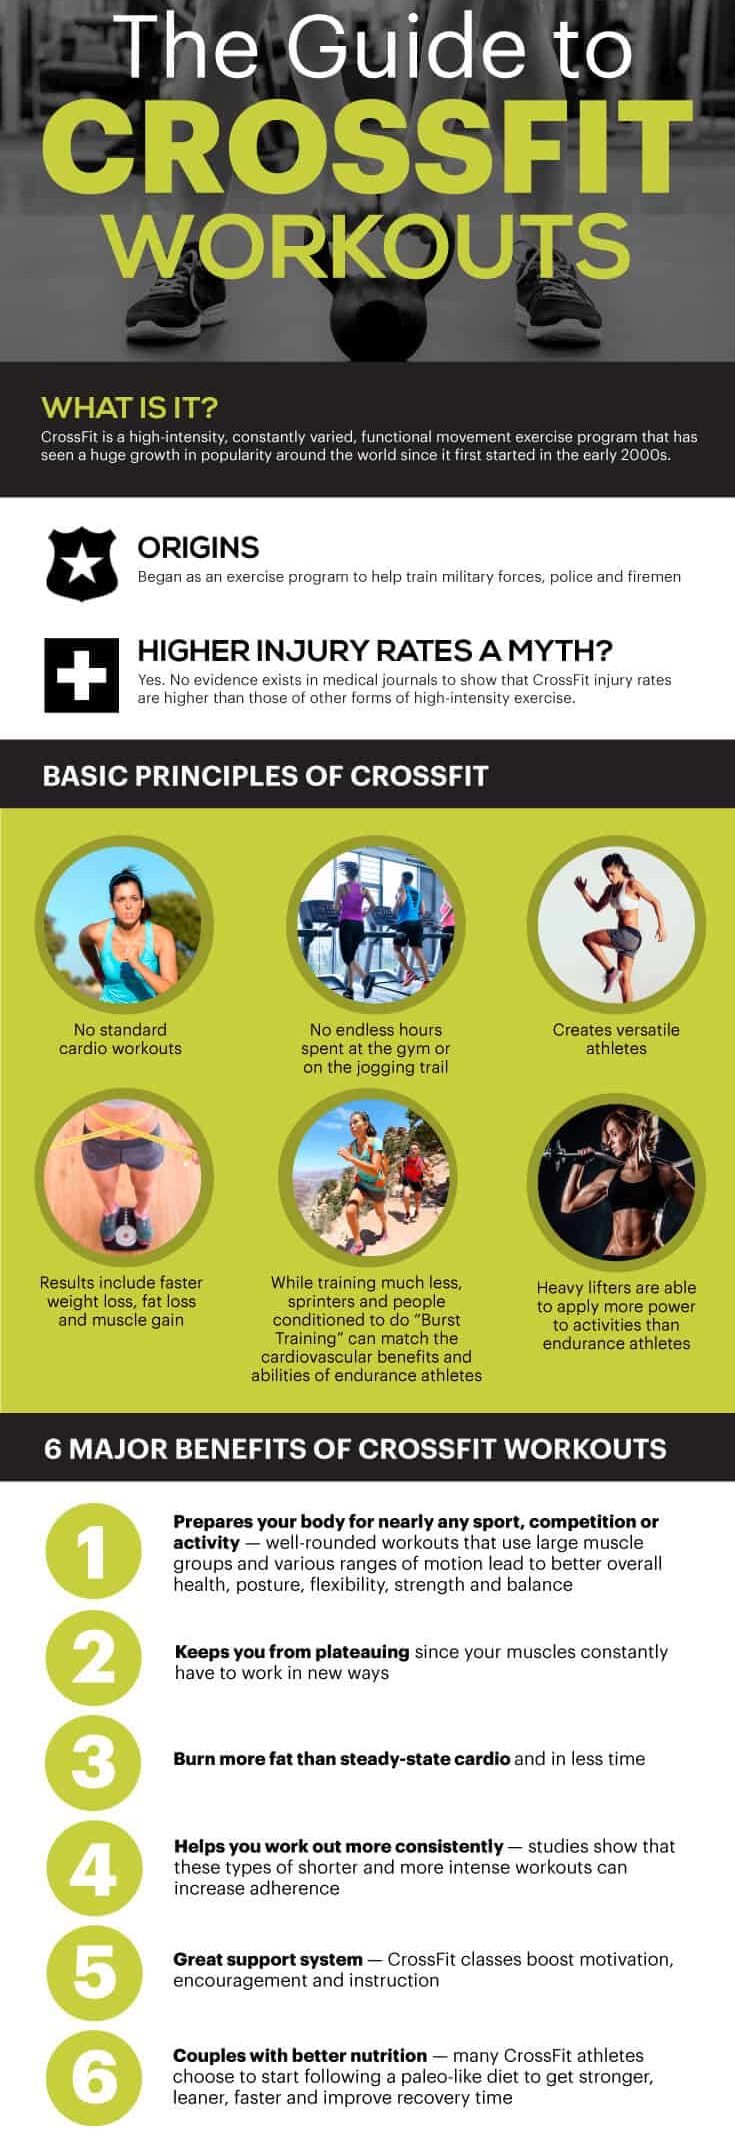 The guide to CrossFit workouts - Dr. Axe